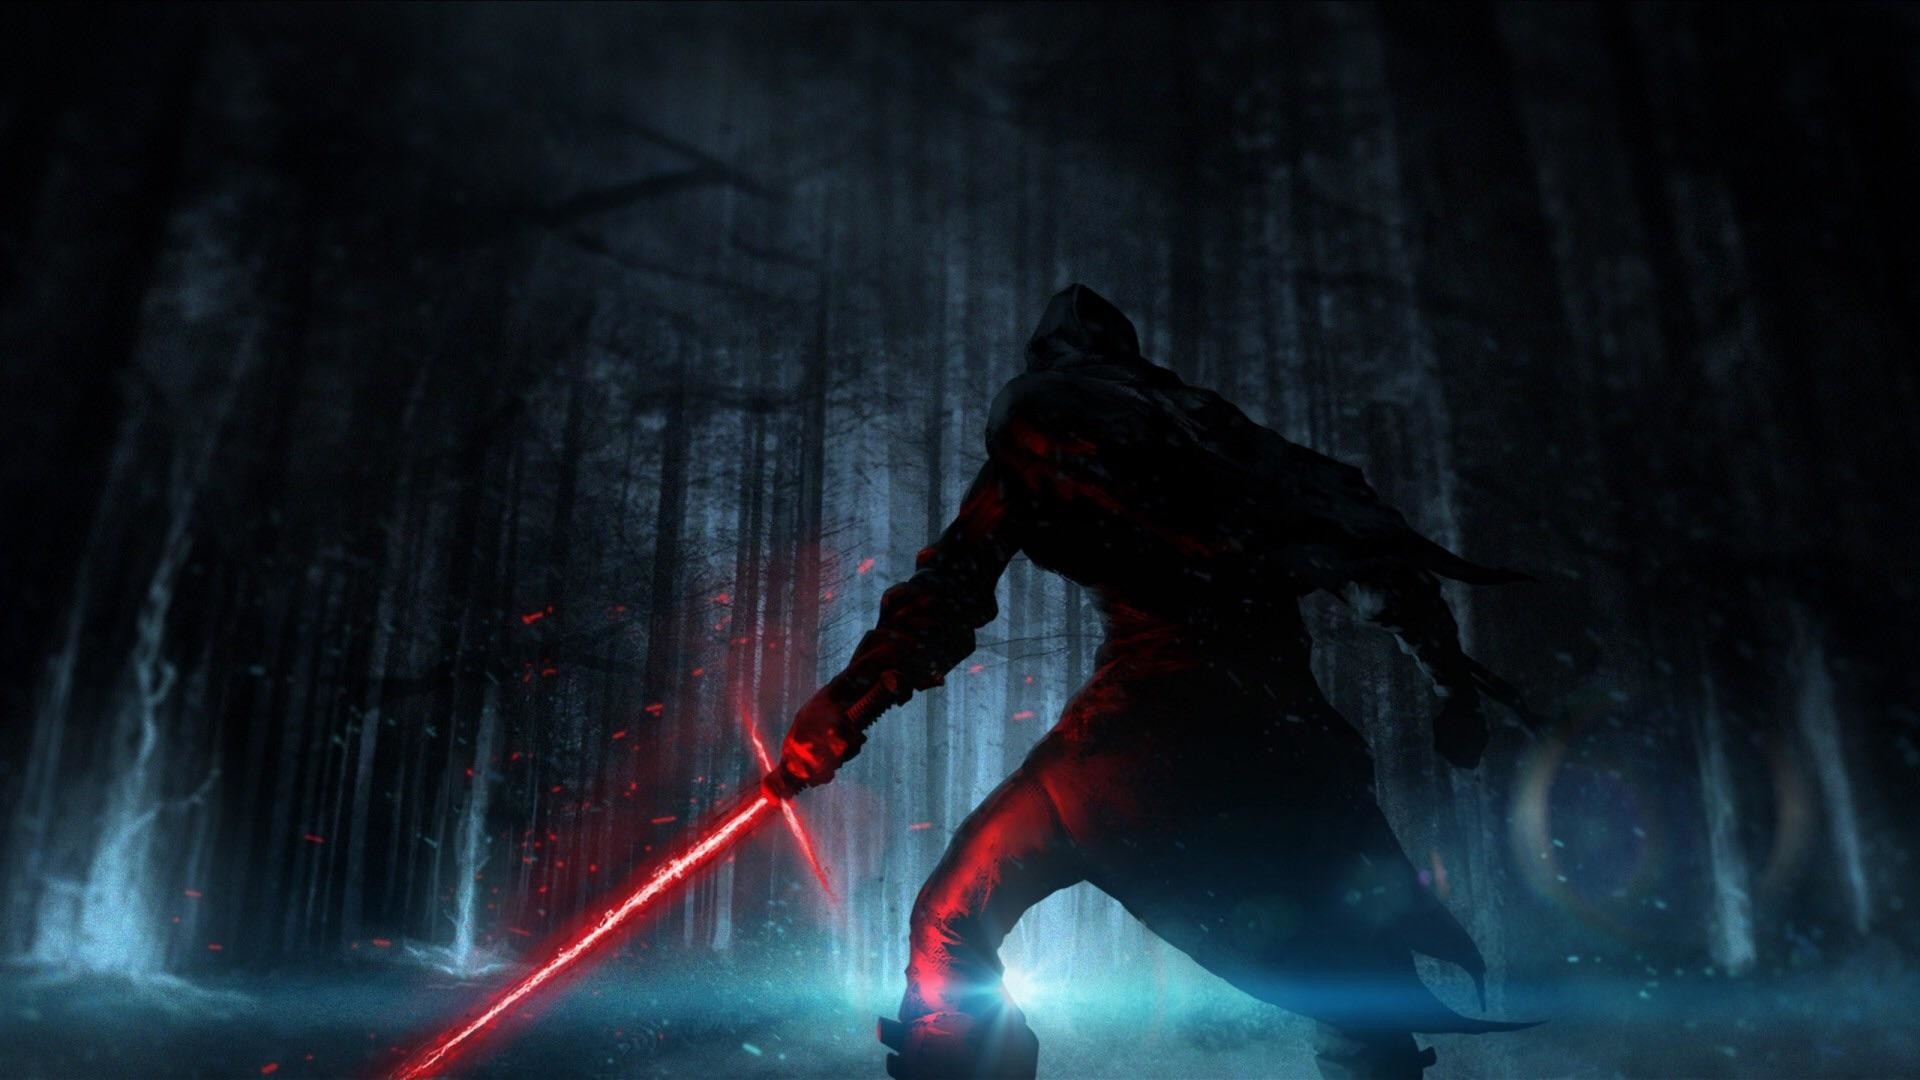 Kylo Ren 1920×1080 Need #iPhone S #Plus #Wallpaper / #Background for #IPhone6SPlus Follow iPhone 6S Plus 3Wallpapers / #Backgrounds Must to Have